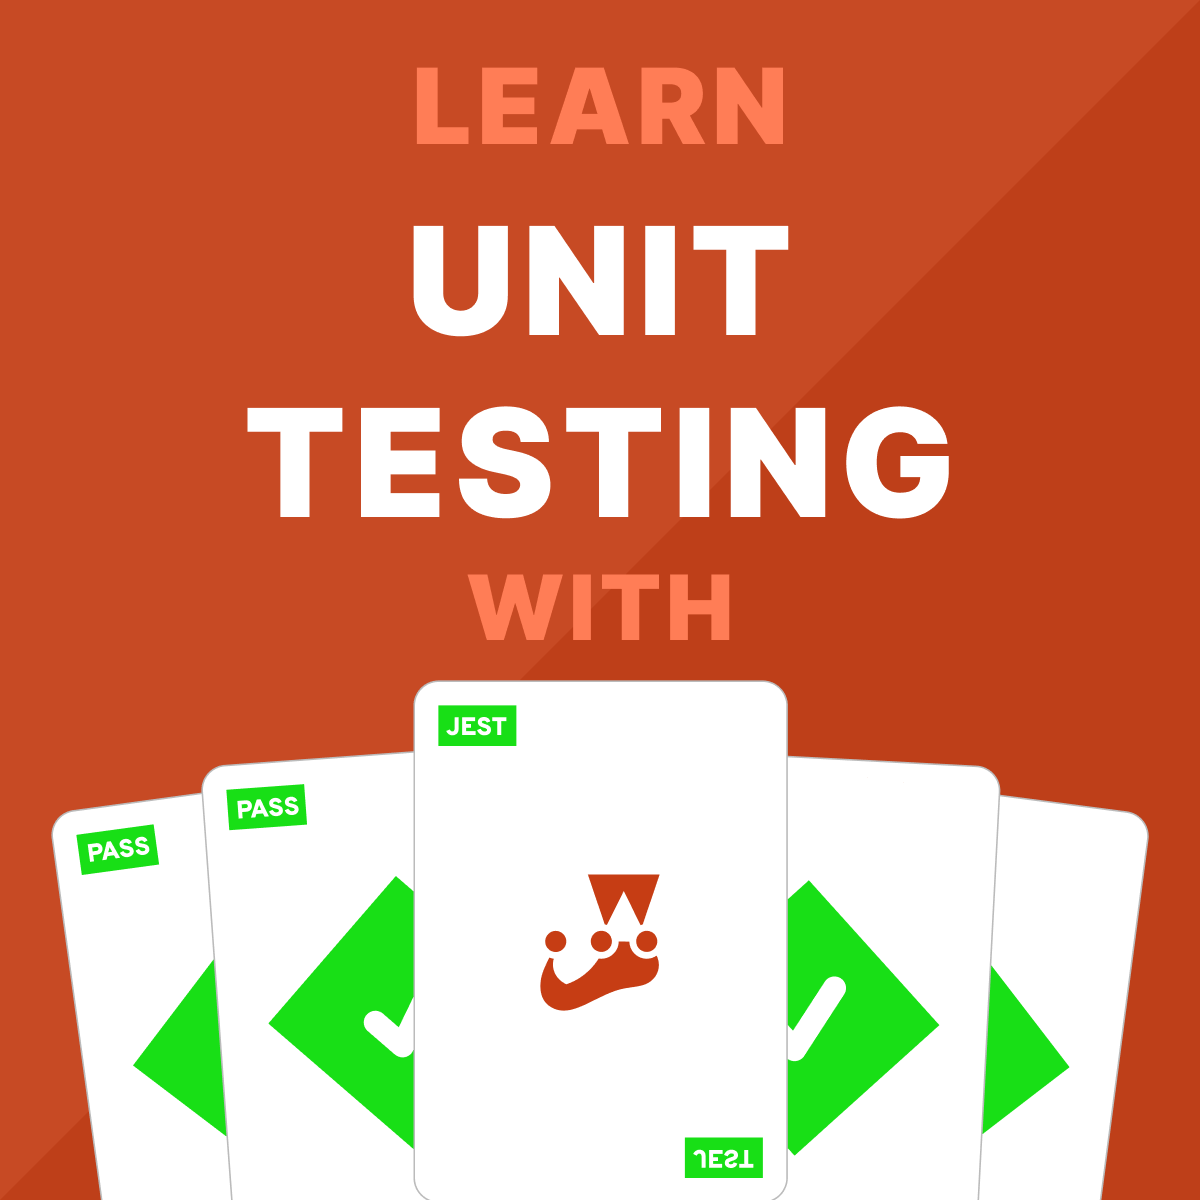 Learn unit testing with Jest